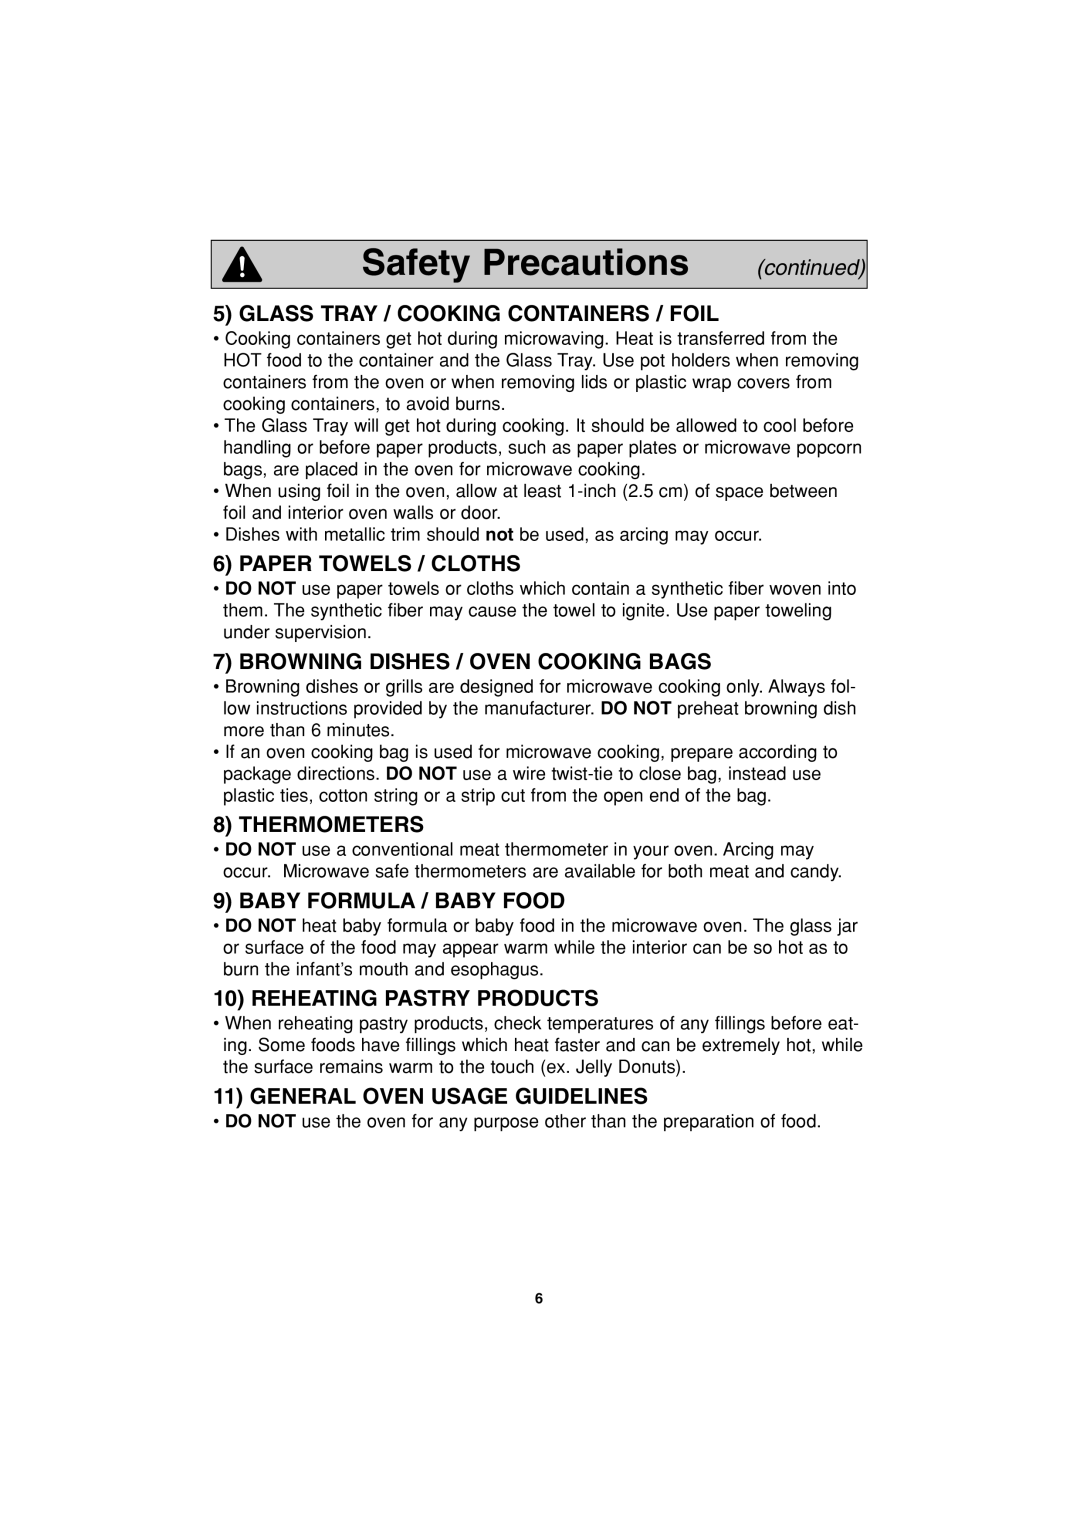 Panasonic NN-S423 Safety Precautions, Glass Tray / Cooking Containers / Foil, Paper Towels / Cloths, Thermometers 